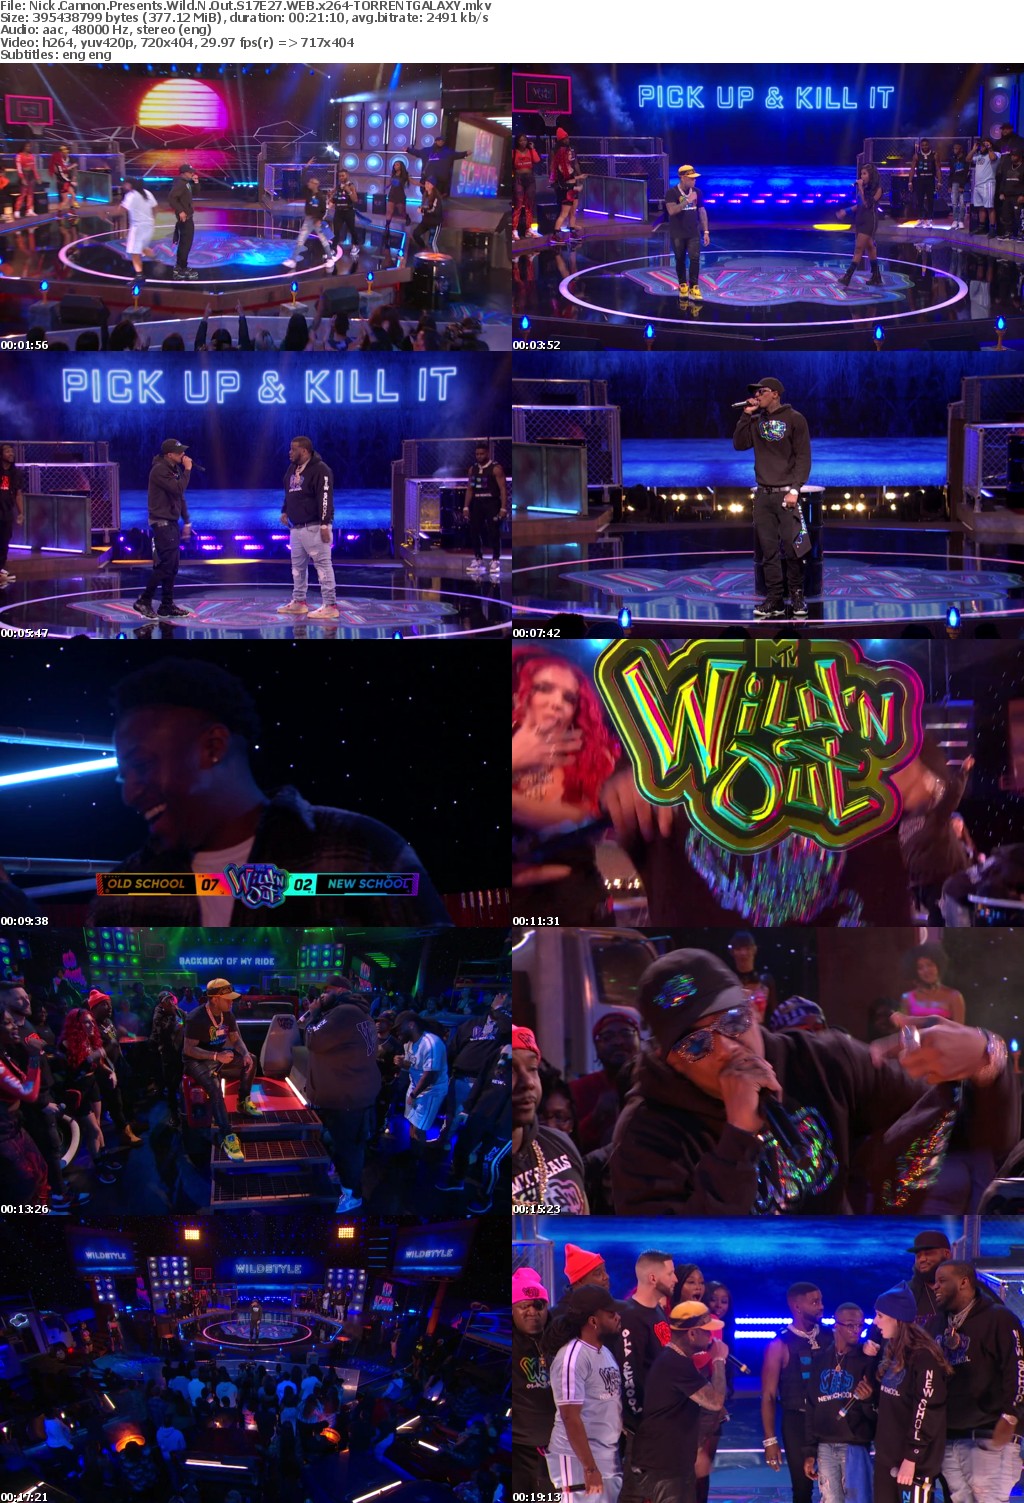 Nick Cannon Presents Wild N Out S17E27 WEB x264-GALAXY